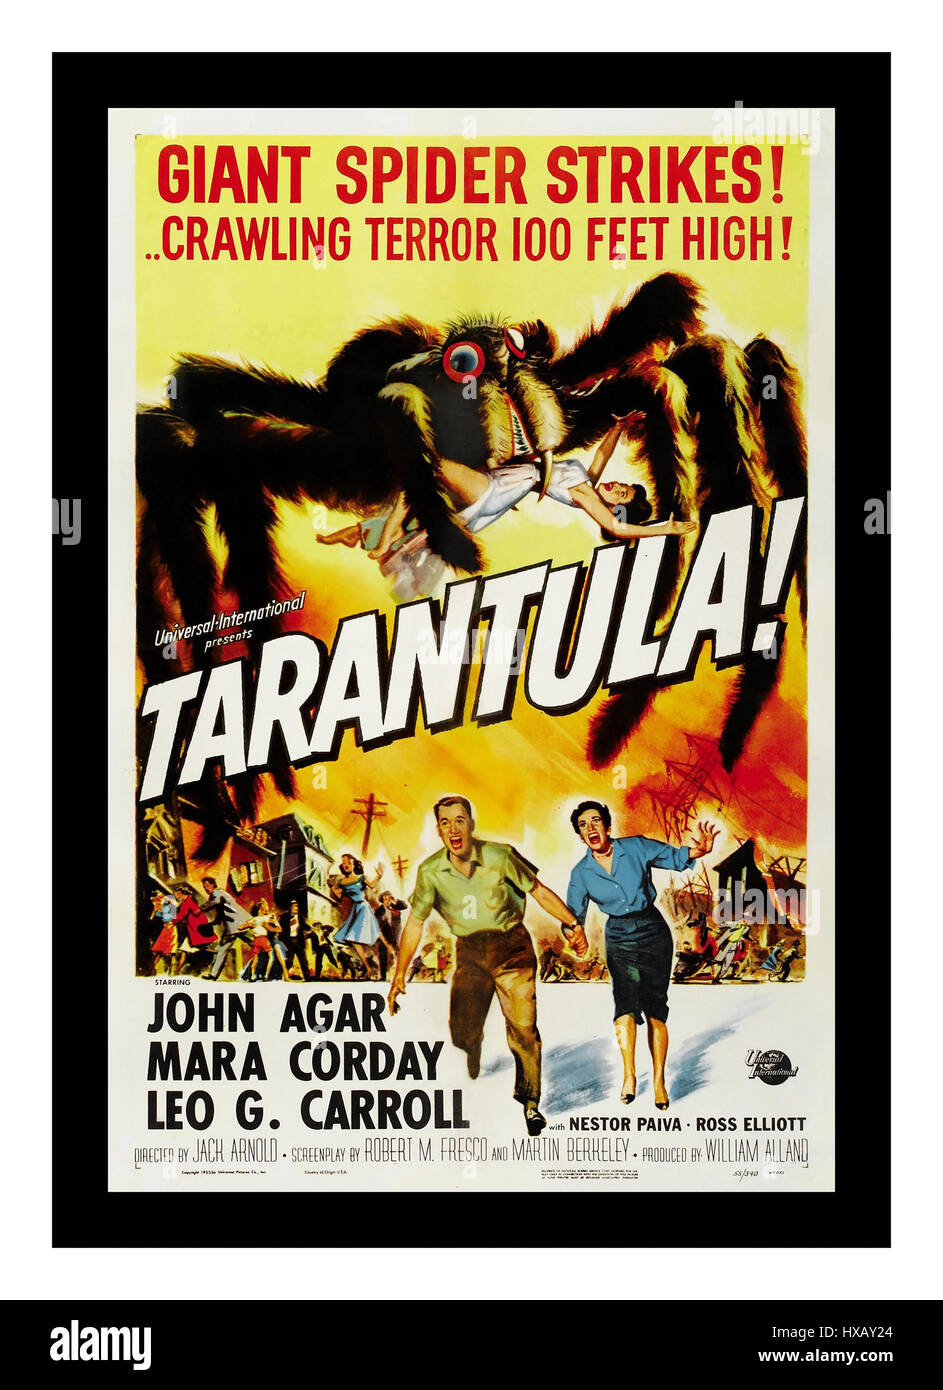 TARANTULA Vintage retro film poster for 'Tarantula'  a 1955 American black-and-white science fiction film from Universal-International, produced by William Alland, directed by Jack Arnold, that stars John Agar, Mara Corday, and Leo G. Carroll. Stock Photo